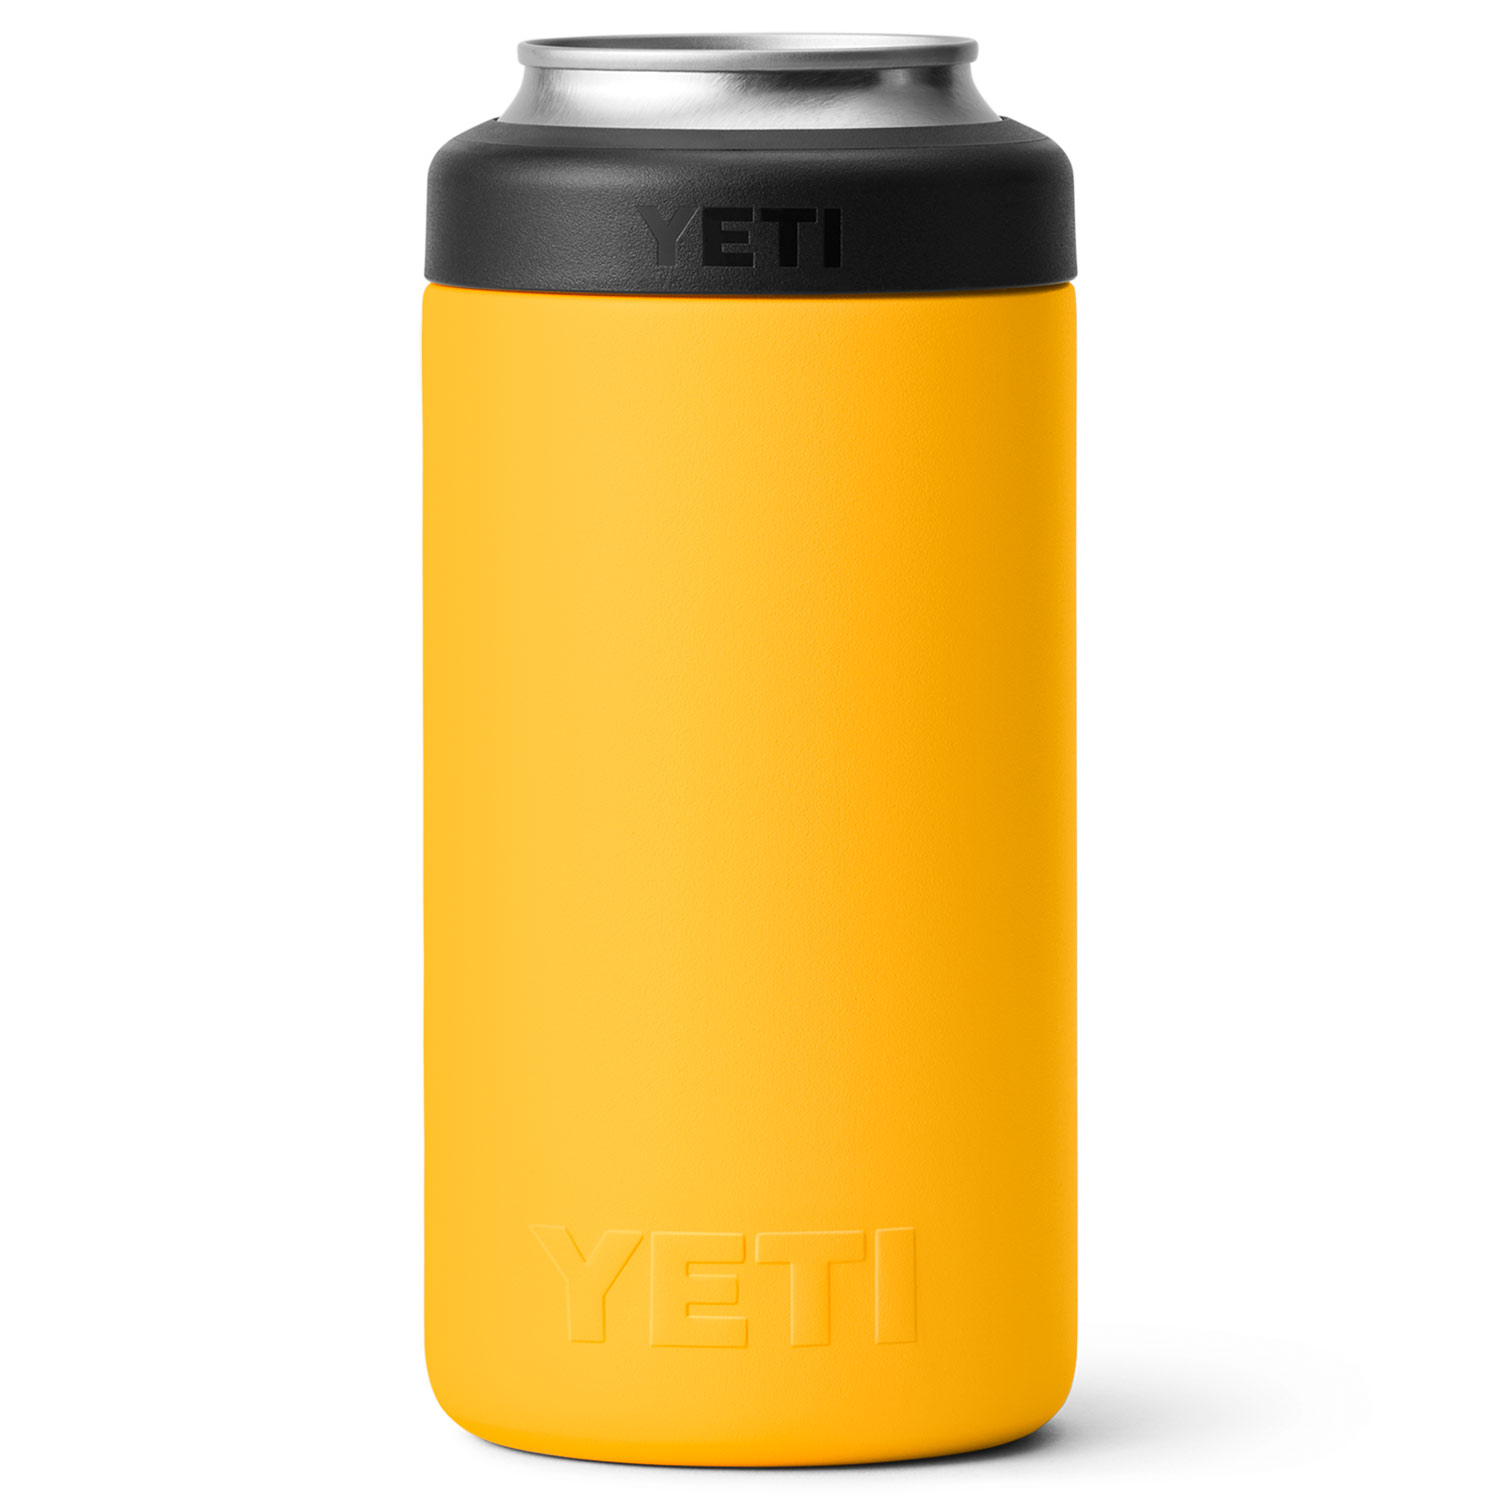 Shout out to @yeti for making such an incredibly durable and